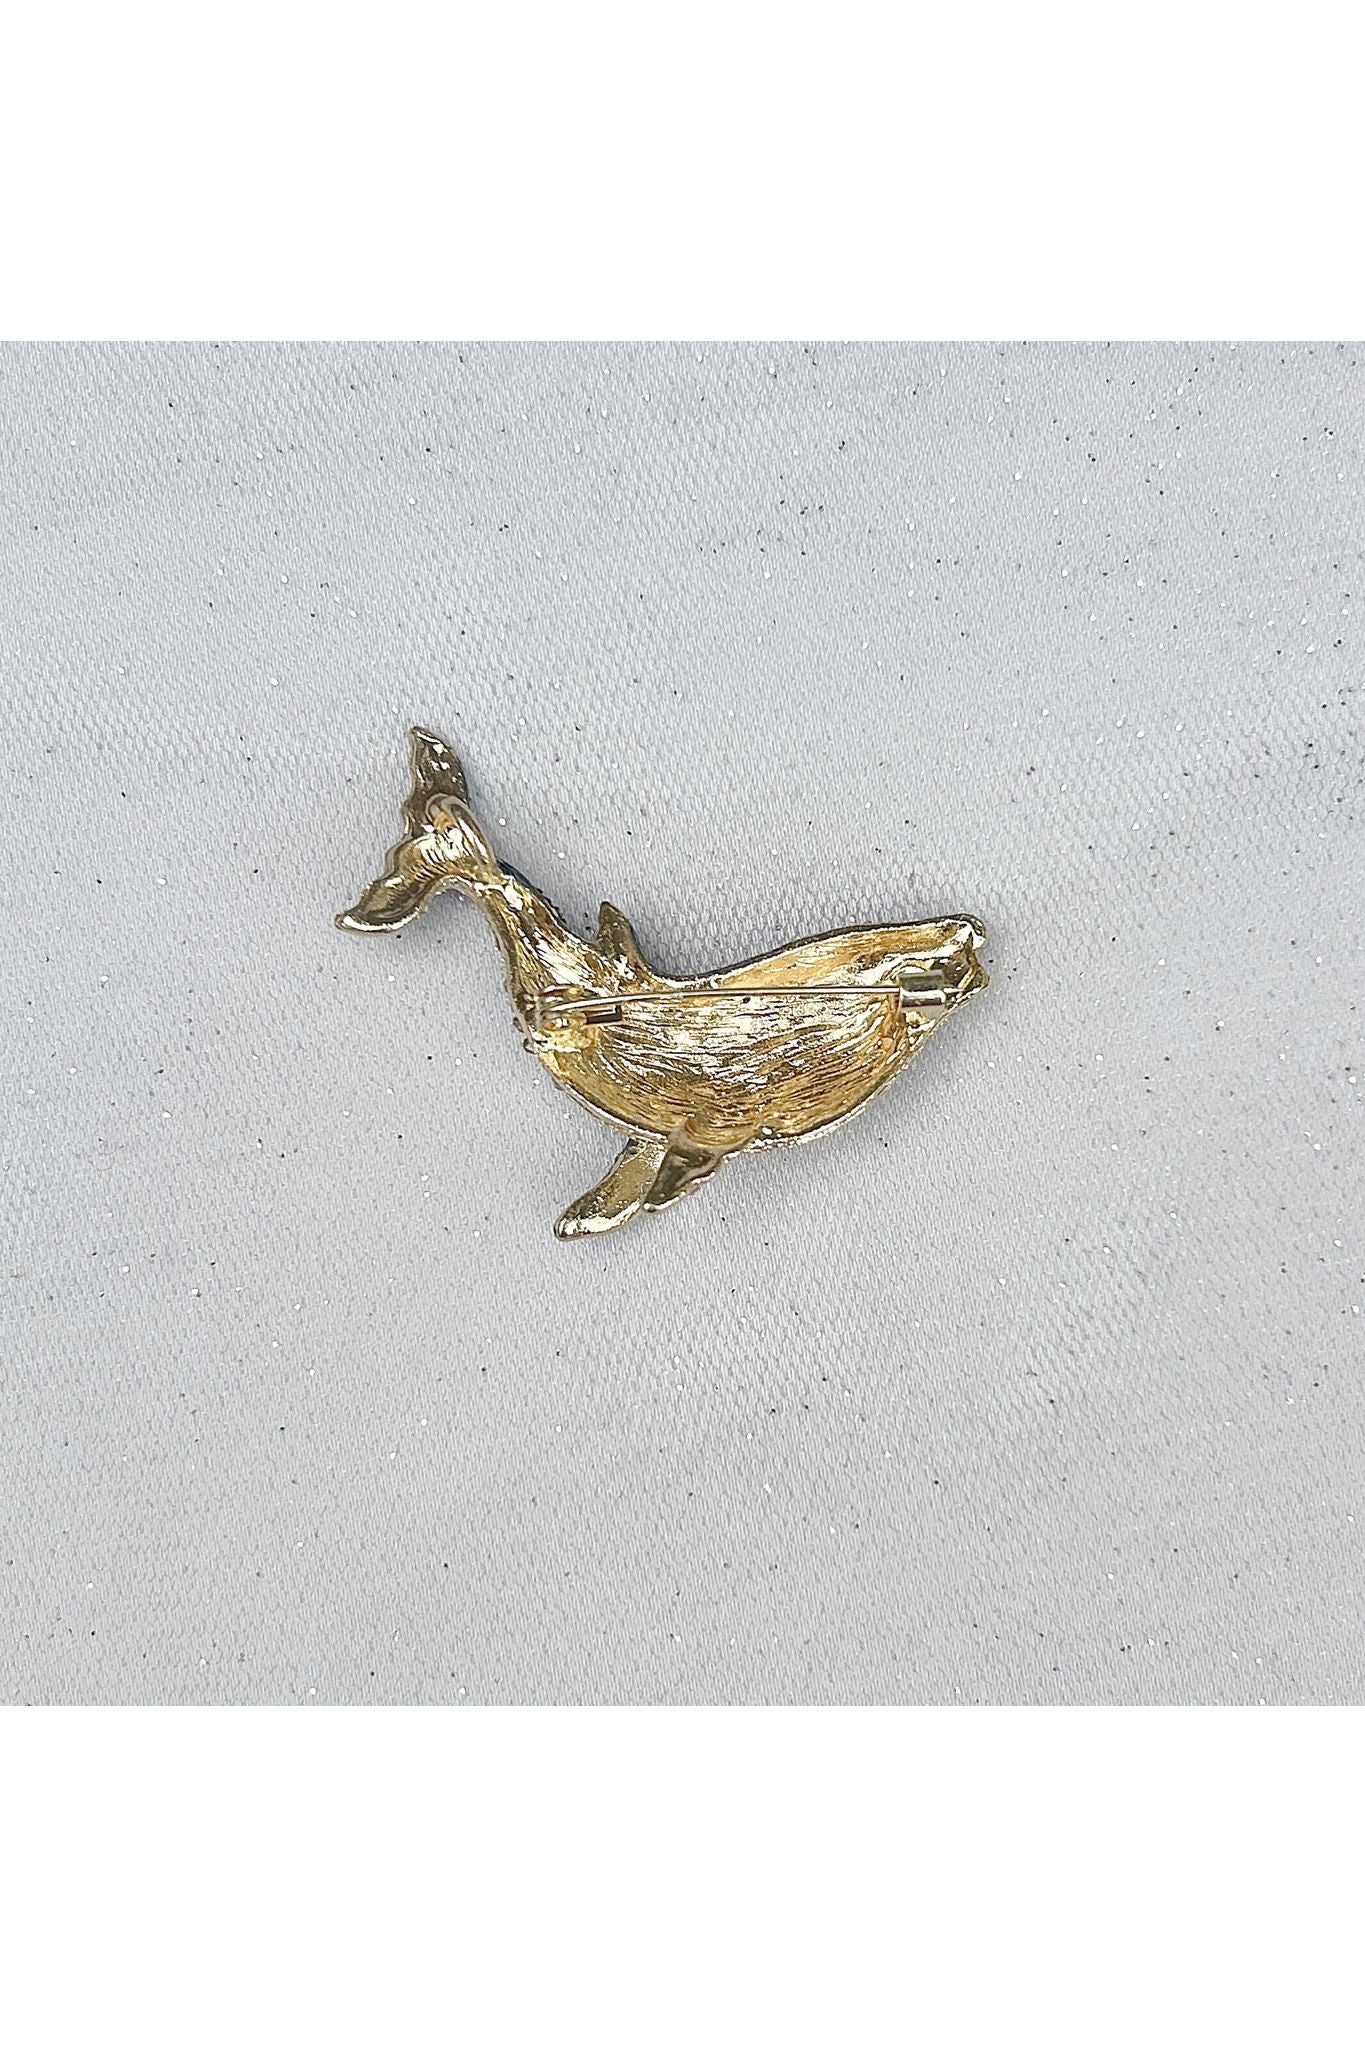 Whale Brooch Animal Brooch Whale Jewellery Whale Pin 5060801176170